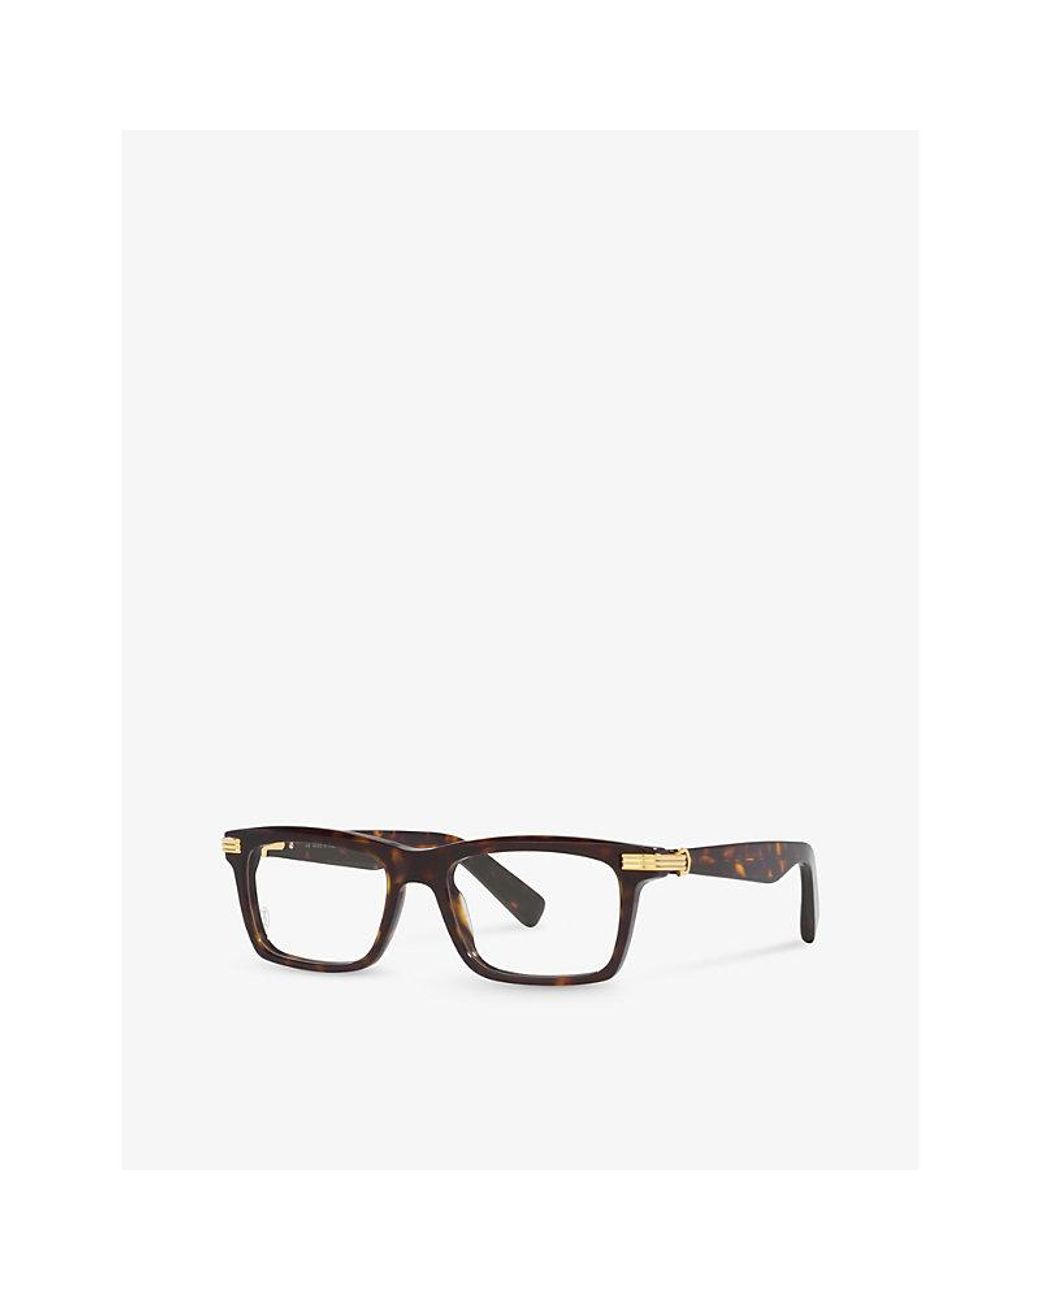 Cartier Rectangle Frame Sunglasses in Black | Lyst